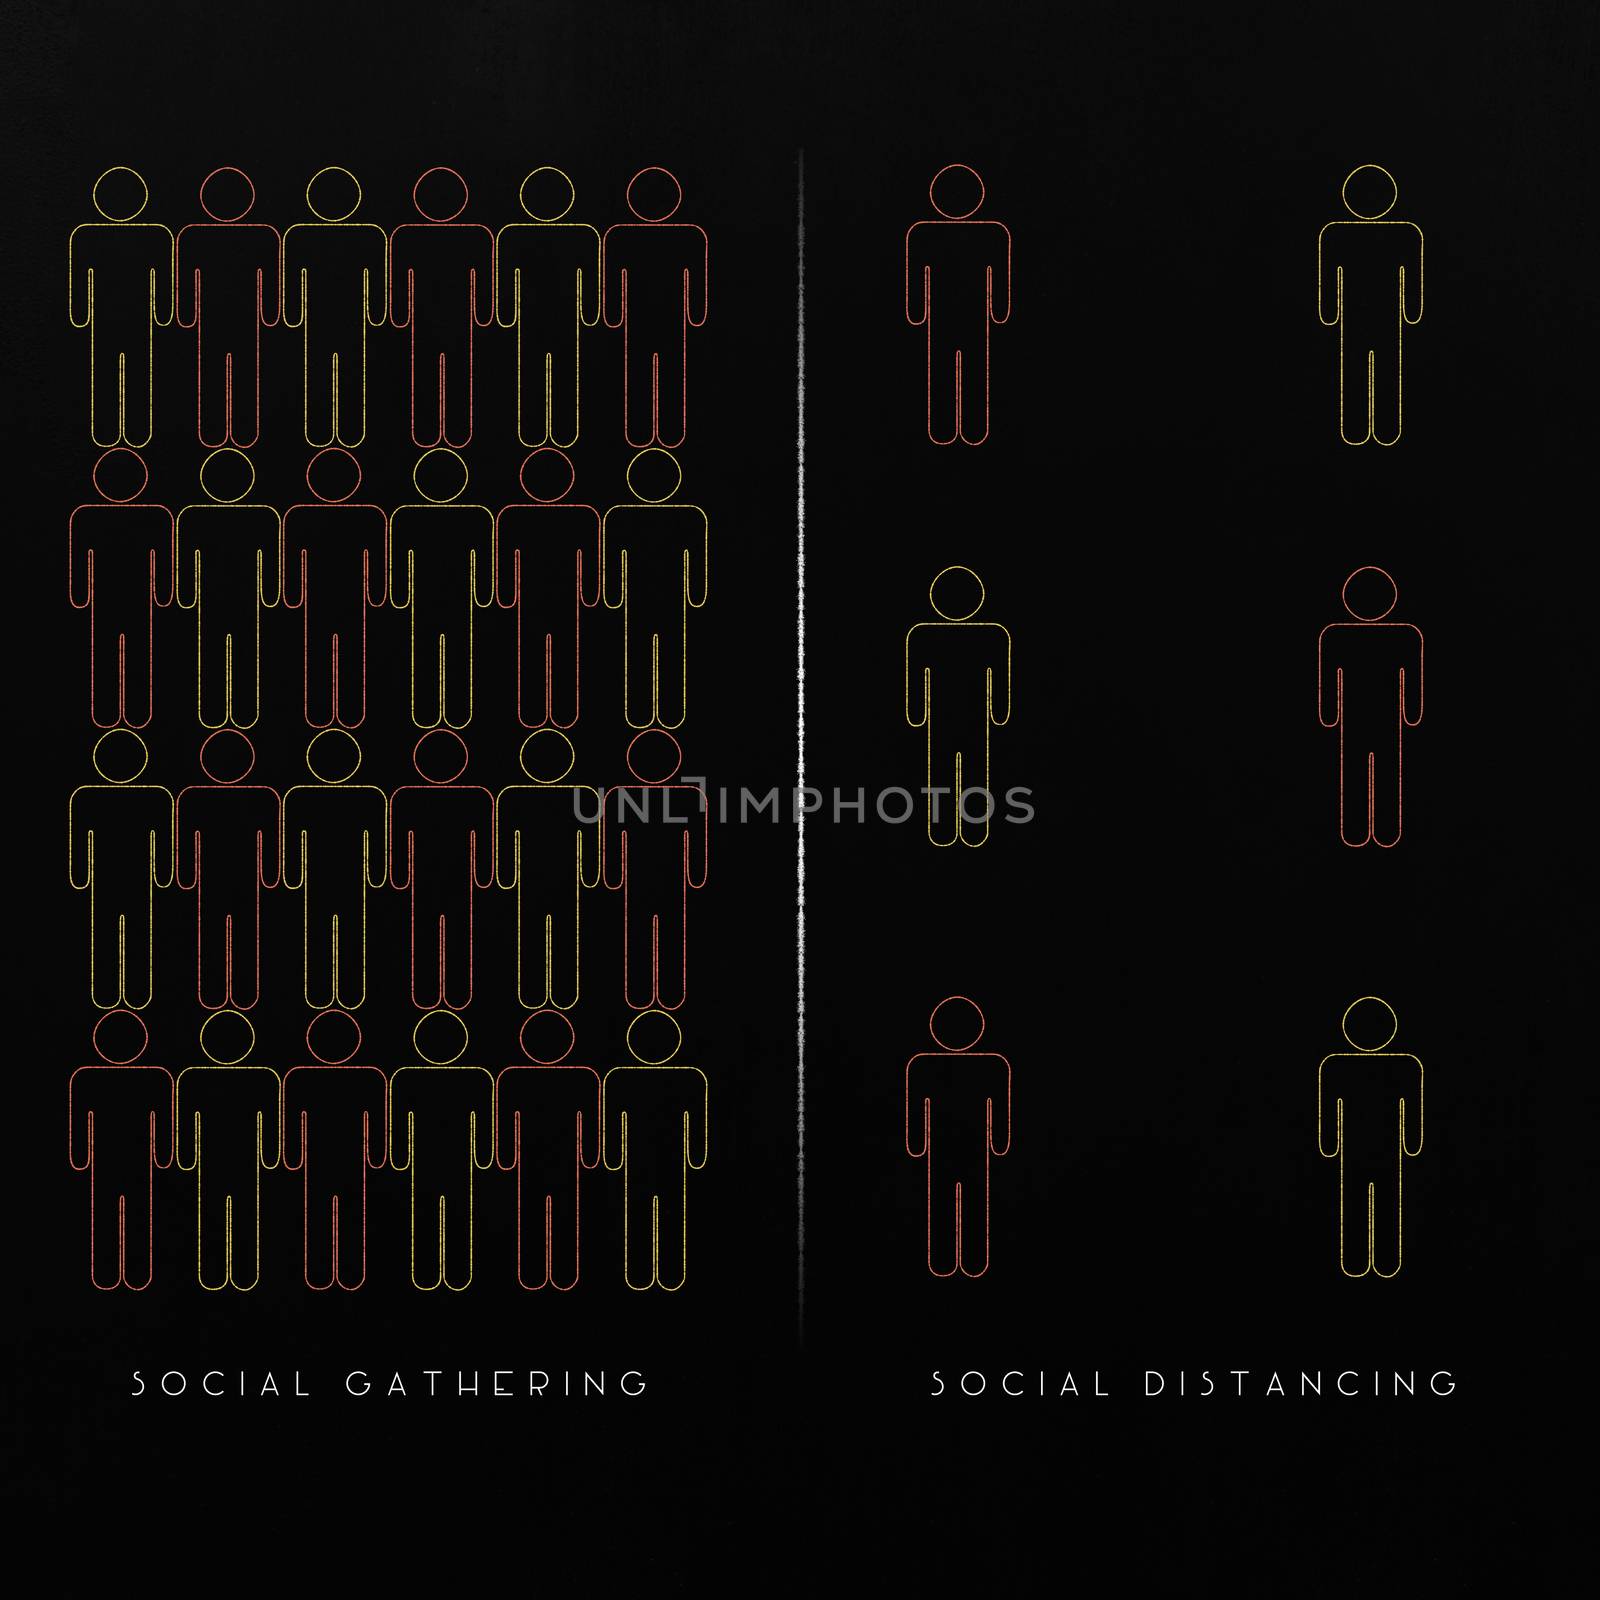 Physical Distance or social distancing to avoid spreading virus, comparison concept by frameshade